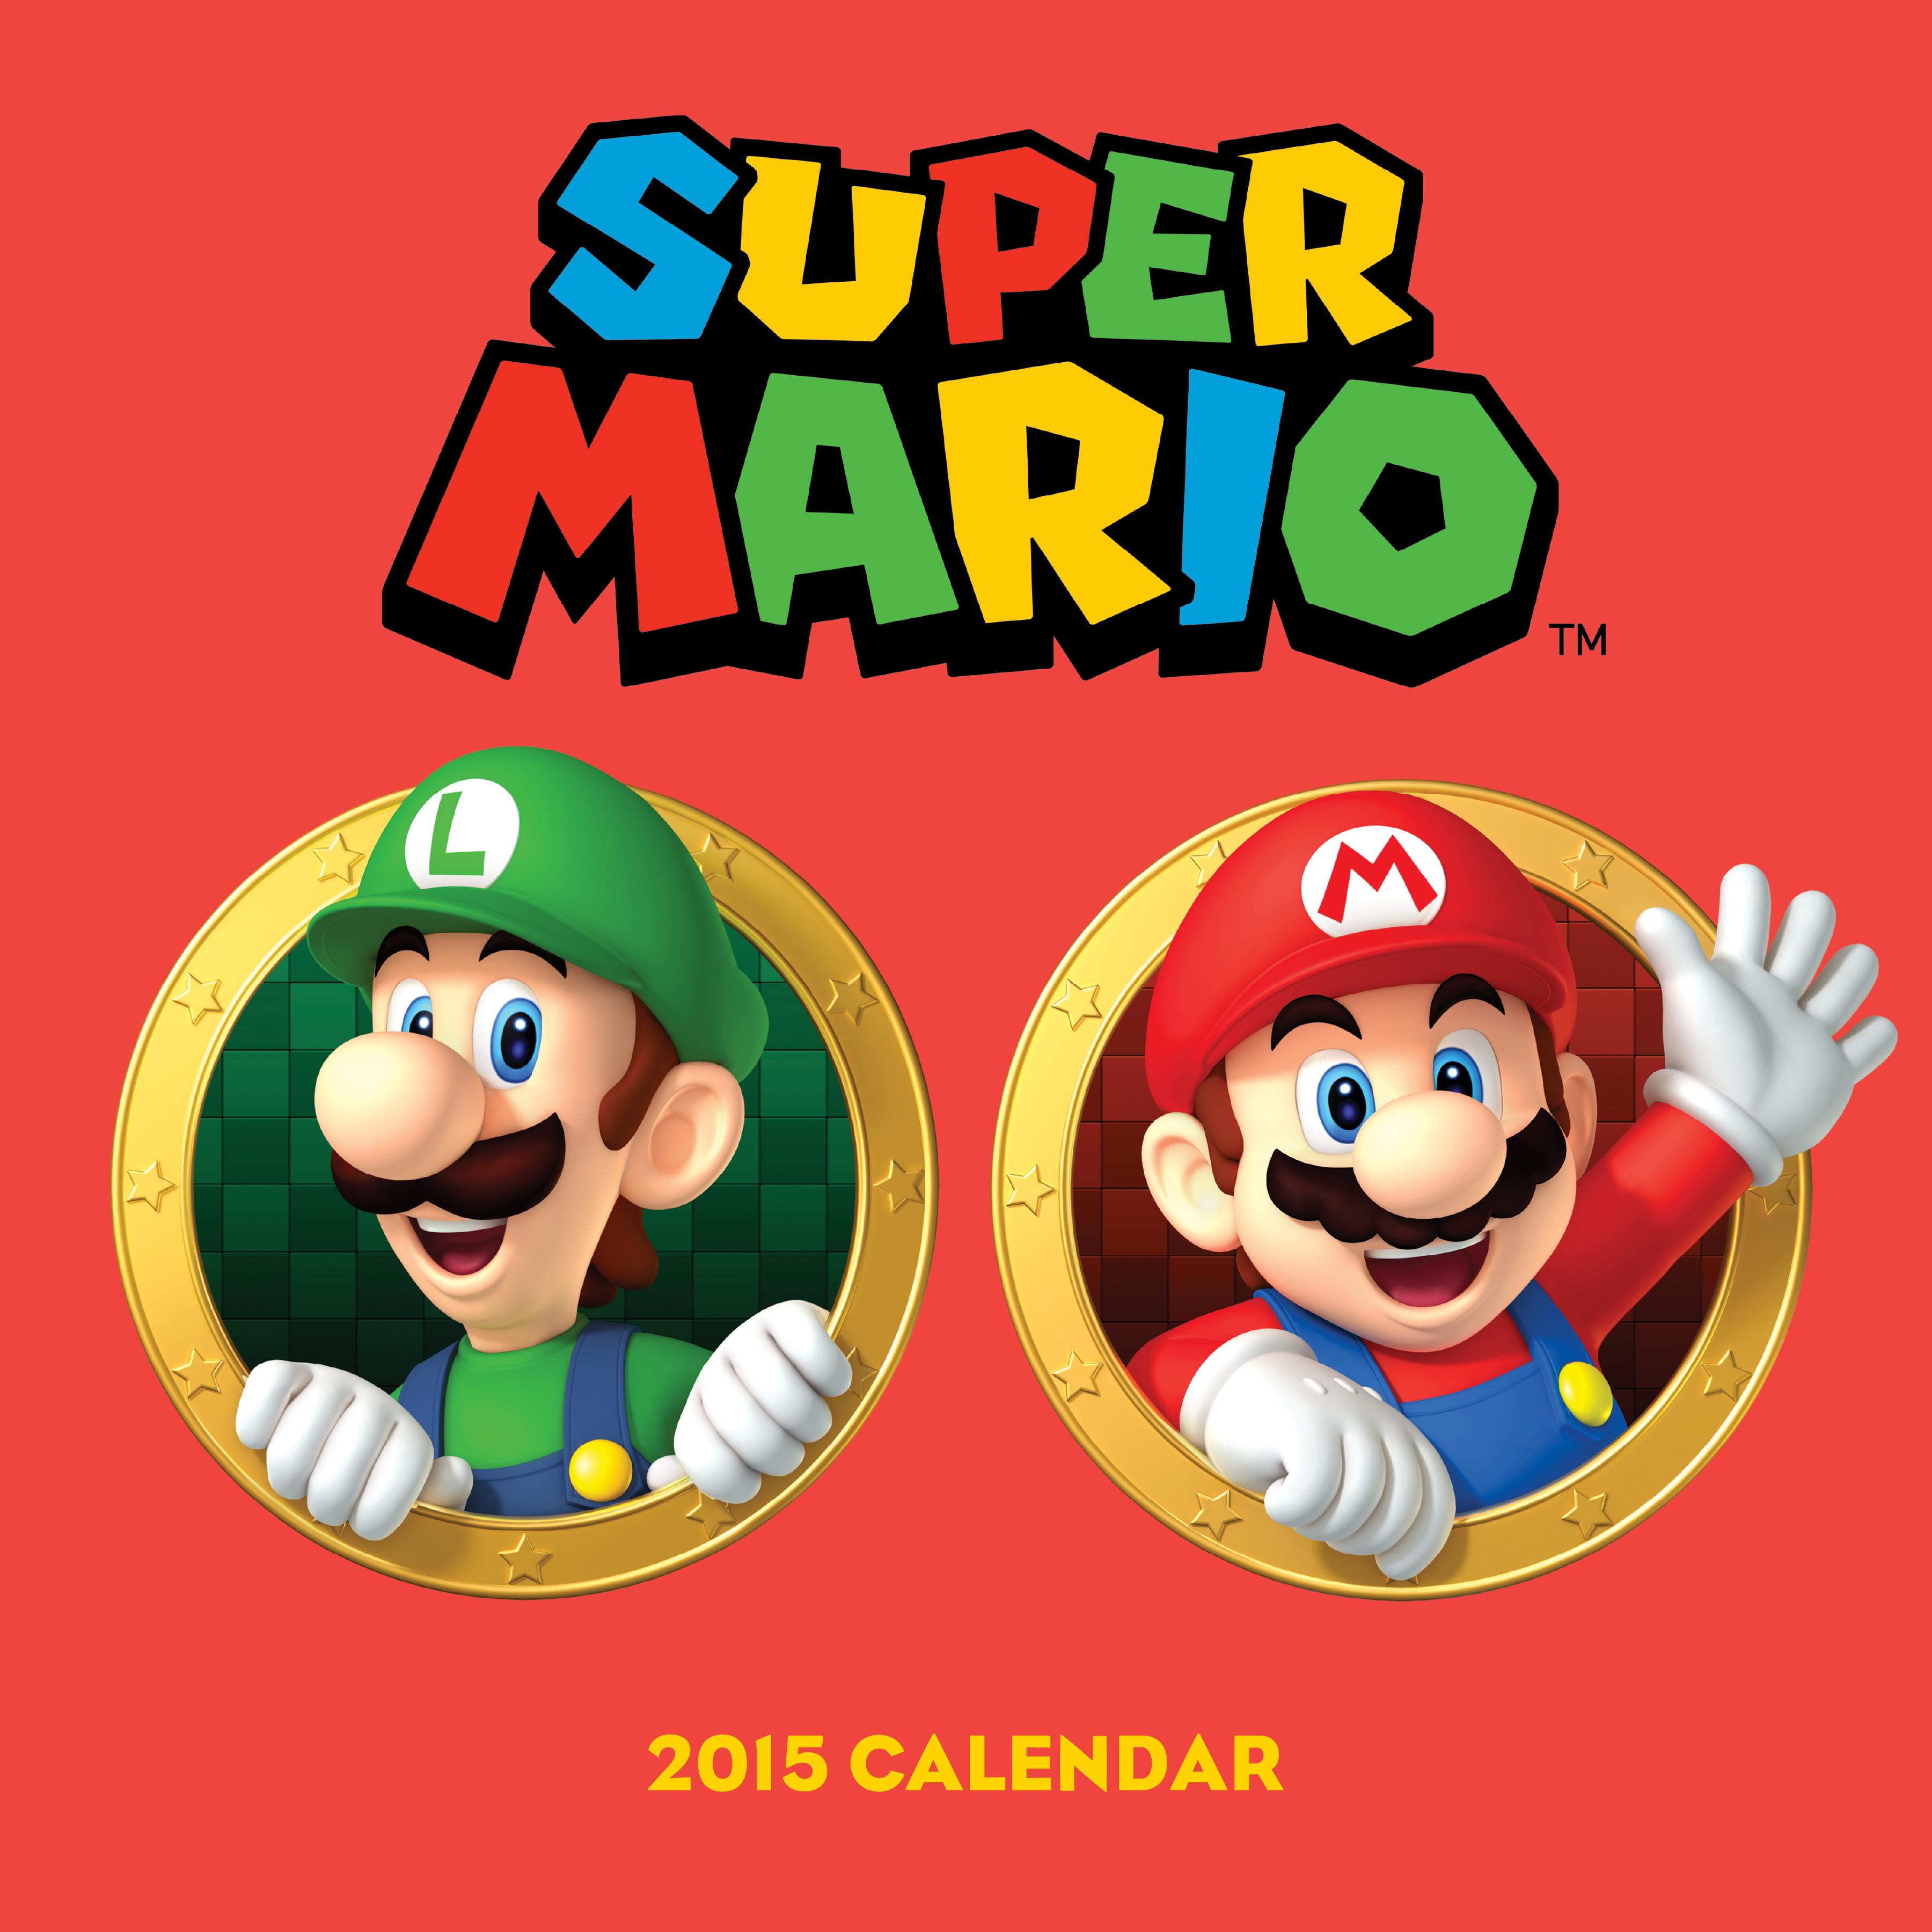 Fan Fiction competition write a Super Mario story to win a 2015 Super